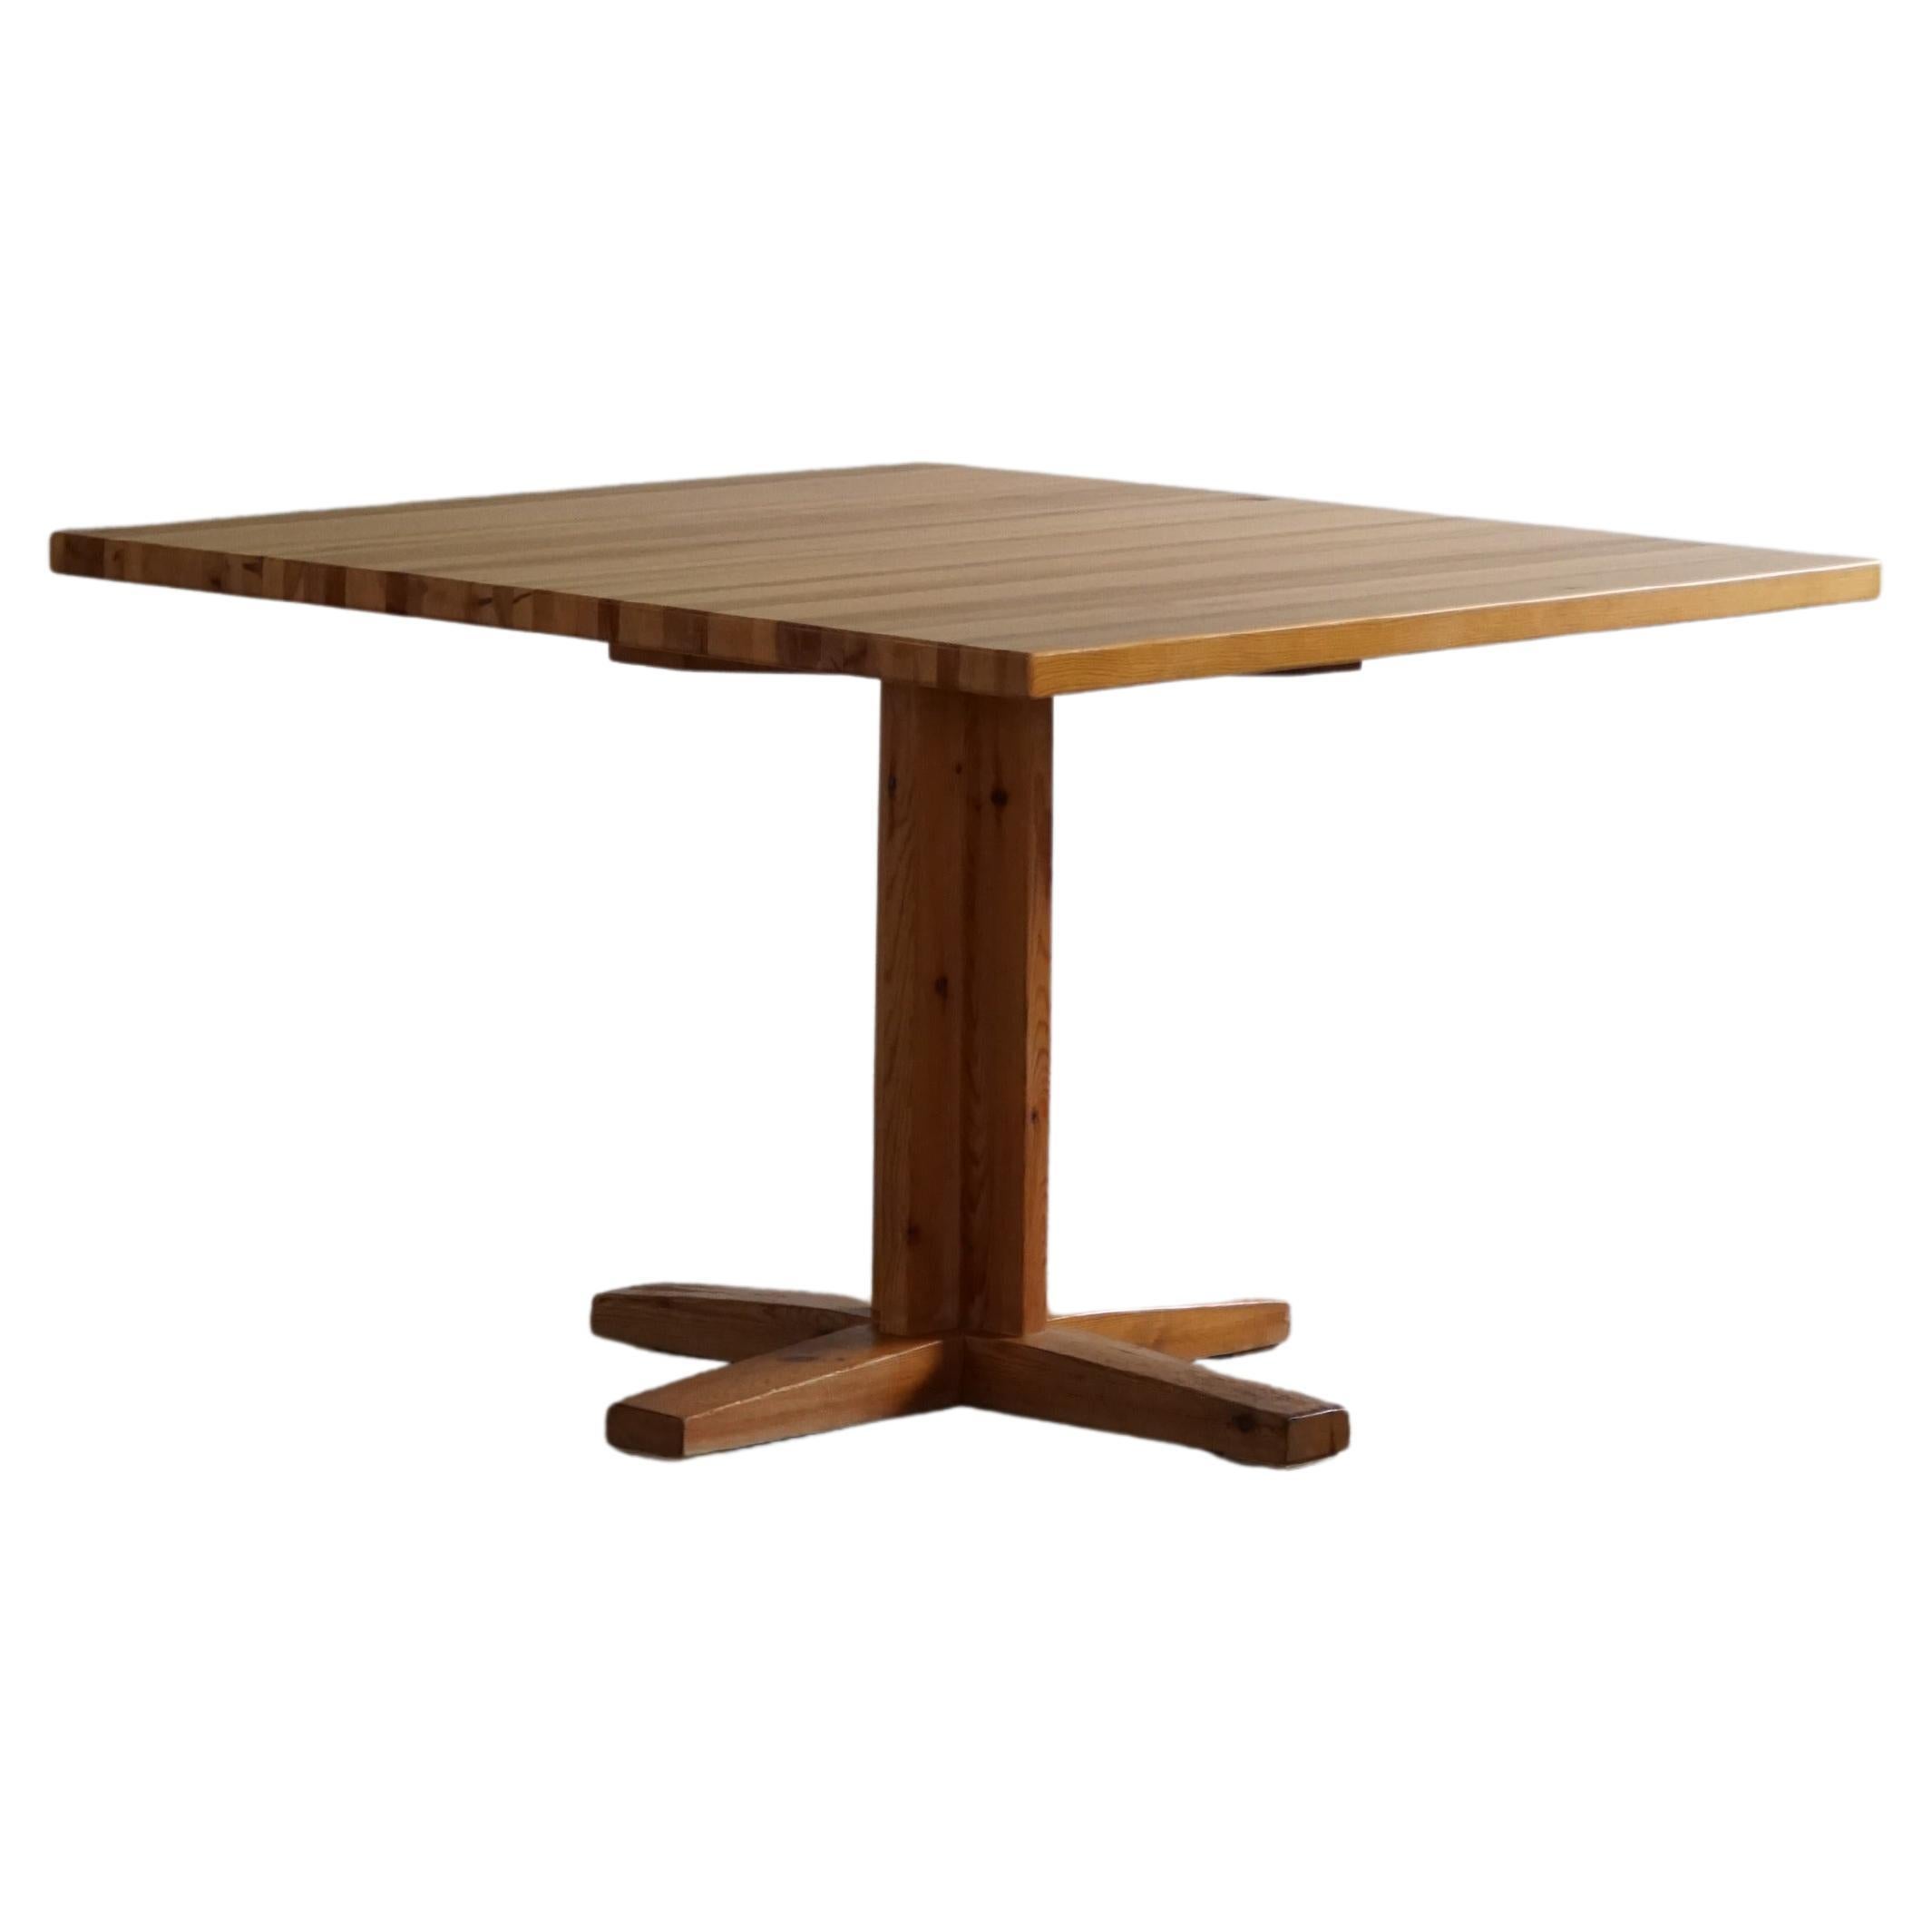 Midcentury Square Dining Room Table in Pine, Danish Cabinetmaker, 1970s For Sale